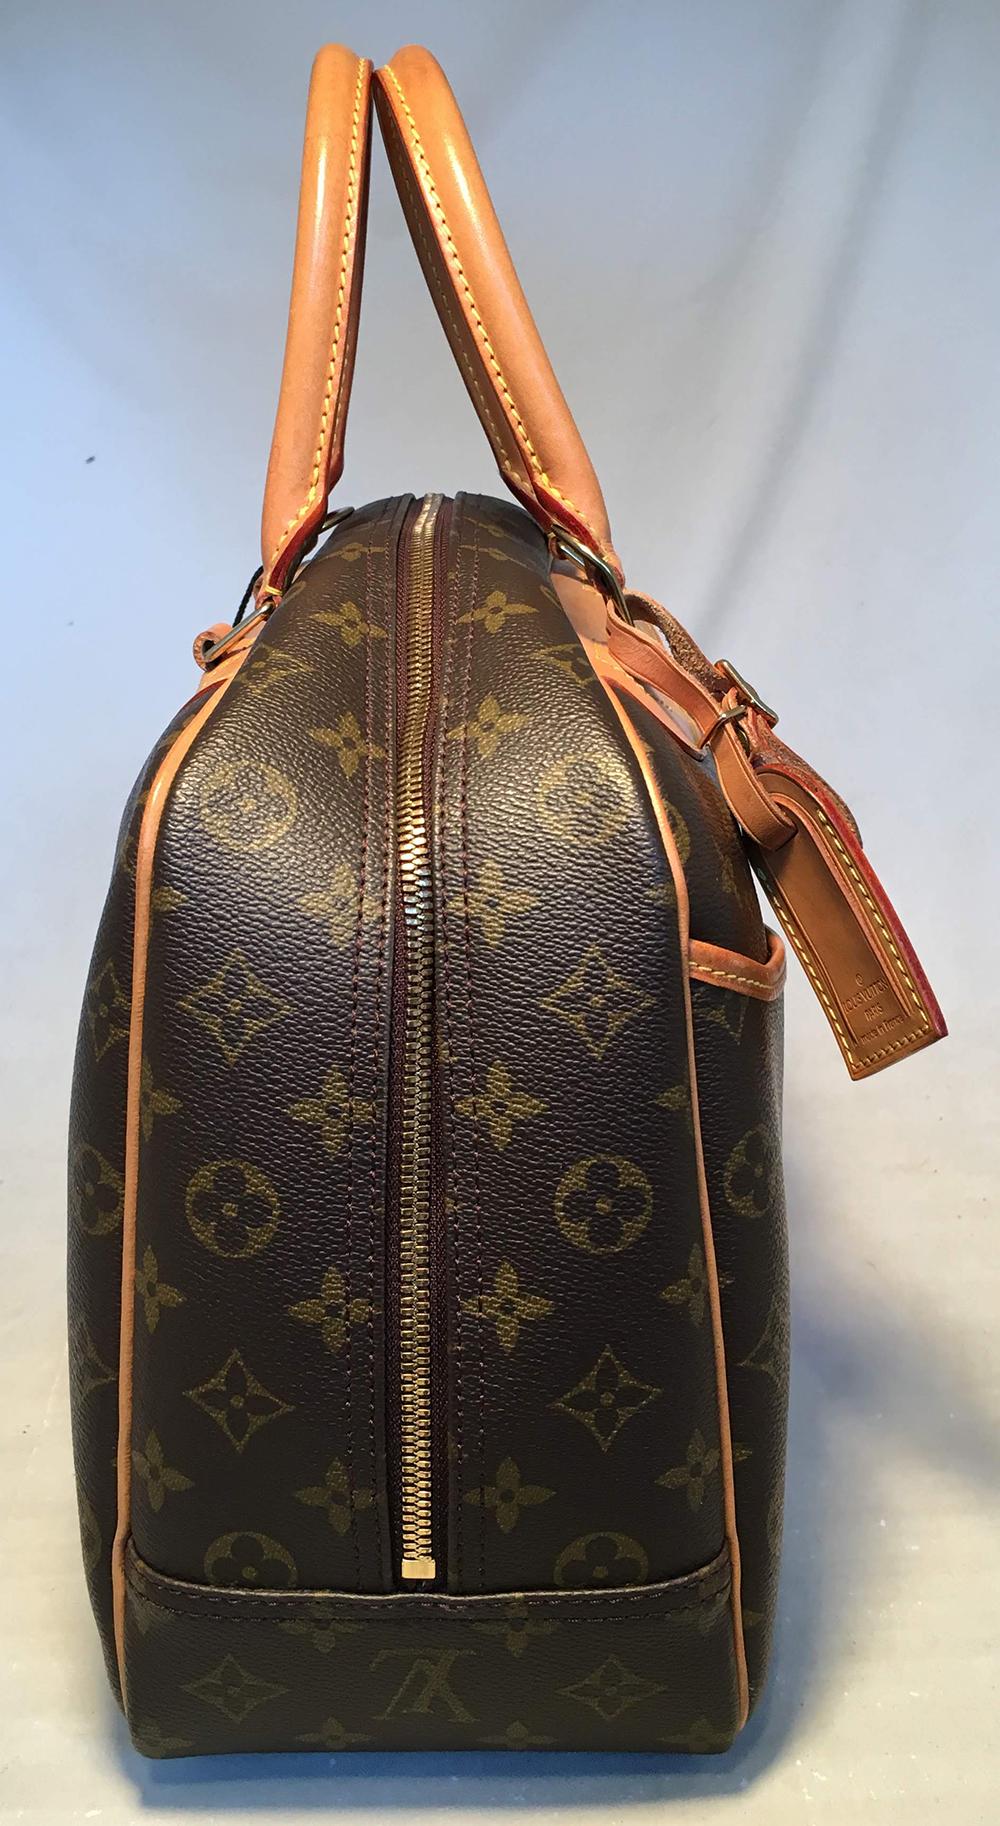 Louis Vuitton Vintage Customized Hand Painted Poppy Flower Monogram Deauville Handbag Tote in excellent condition. Signature monogram canvas exterior trimmed with bronze hardware and tan leather trim. Customized, hand painted orange and red poppy